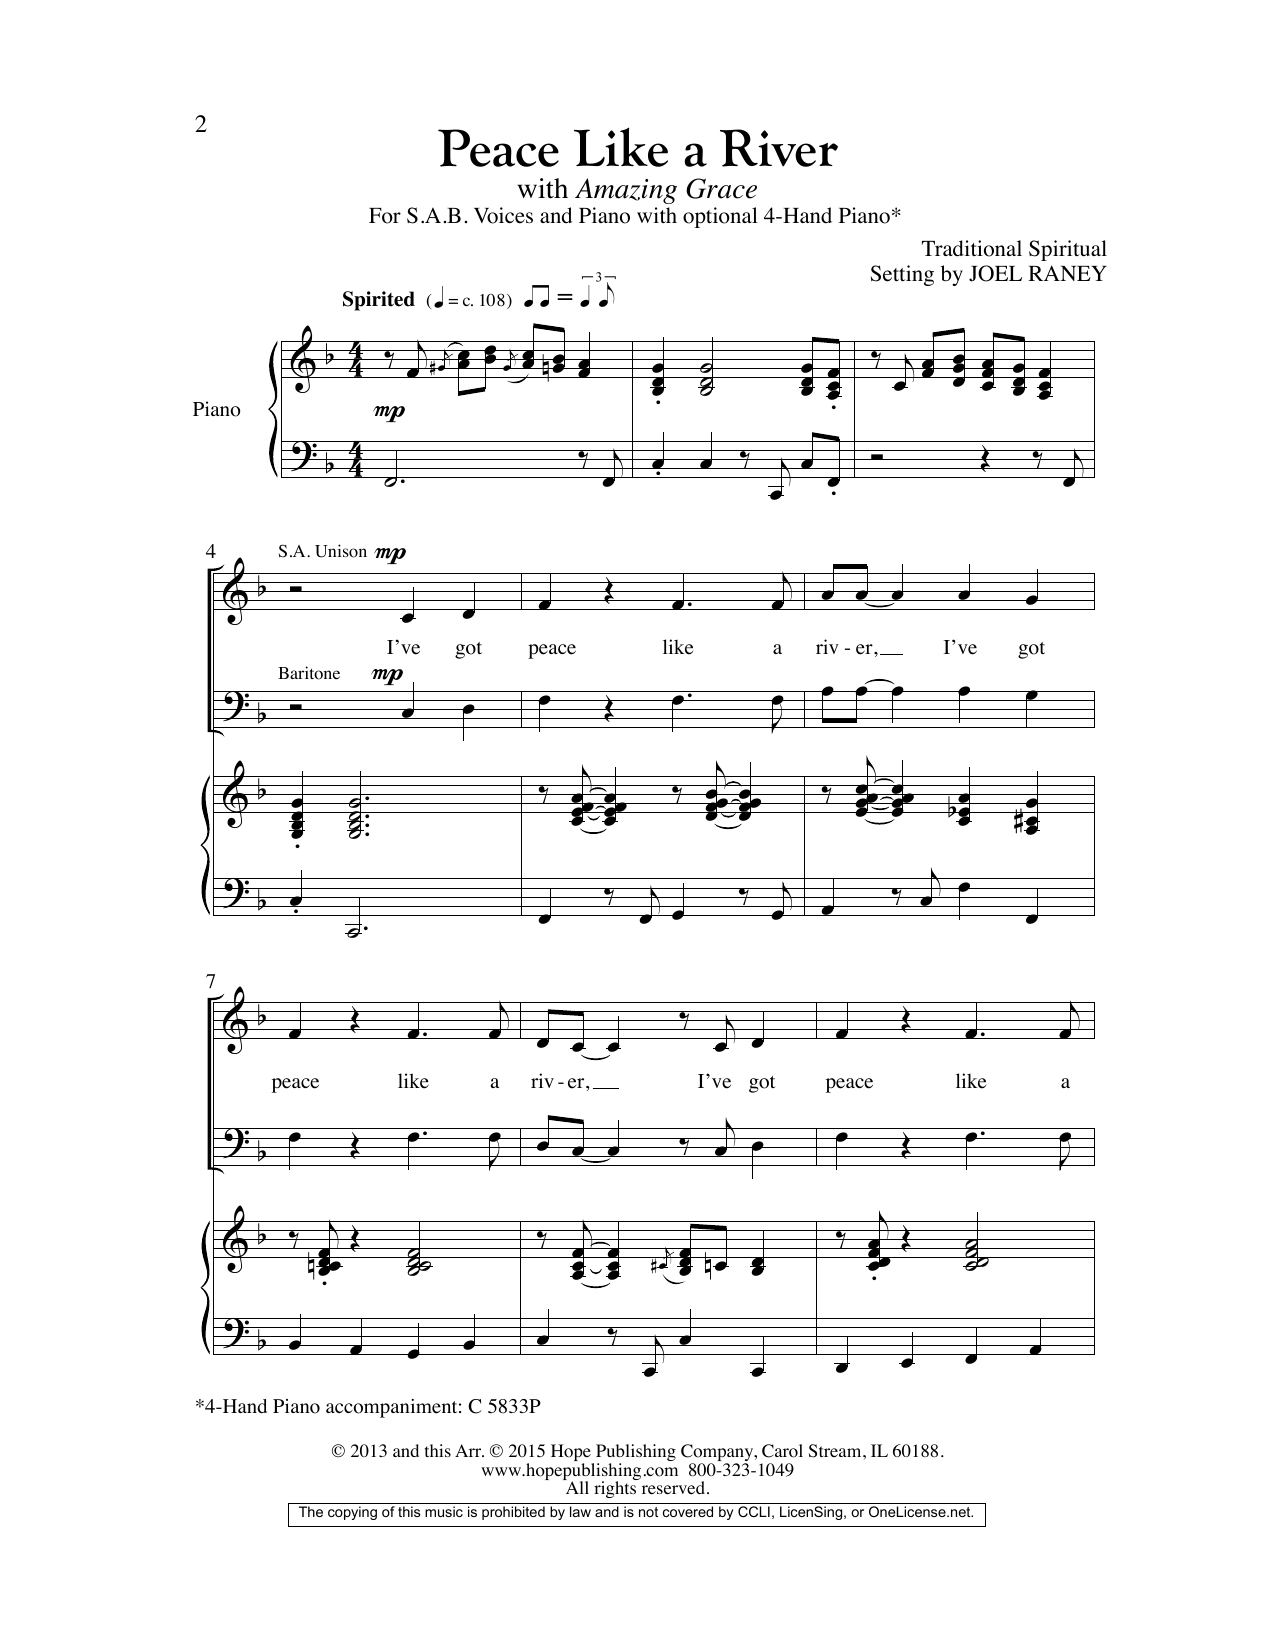 Download Joel Raney Peace Like A River (with Amazing Grace) Sheet Music